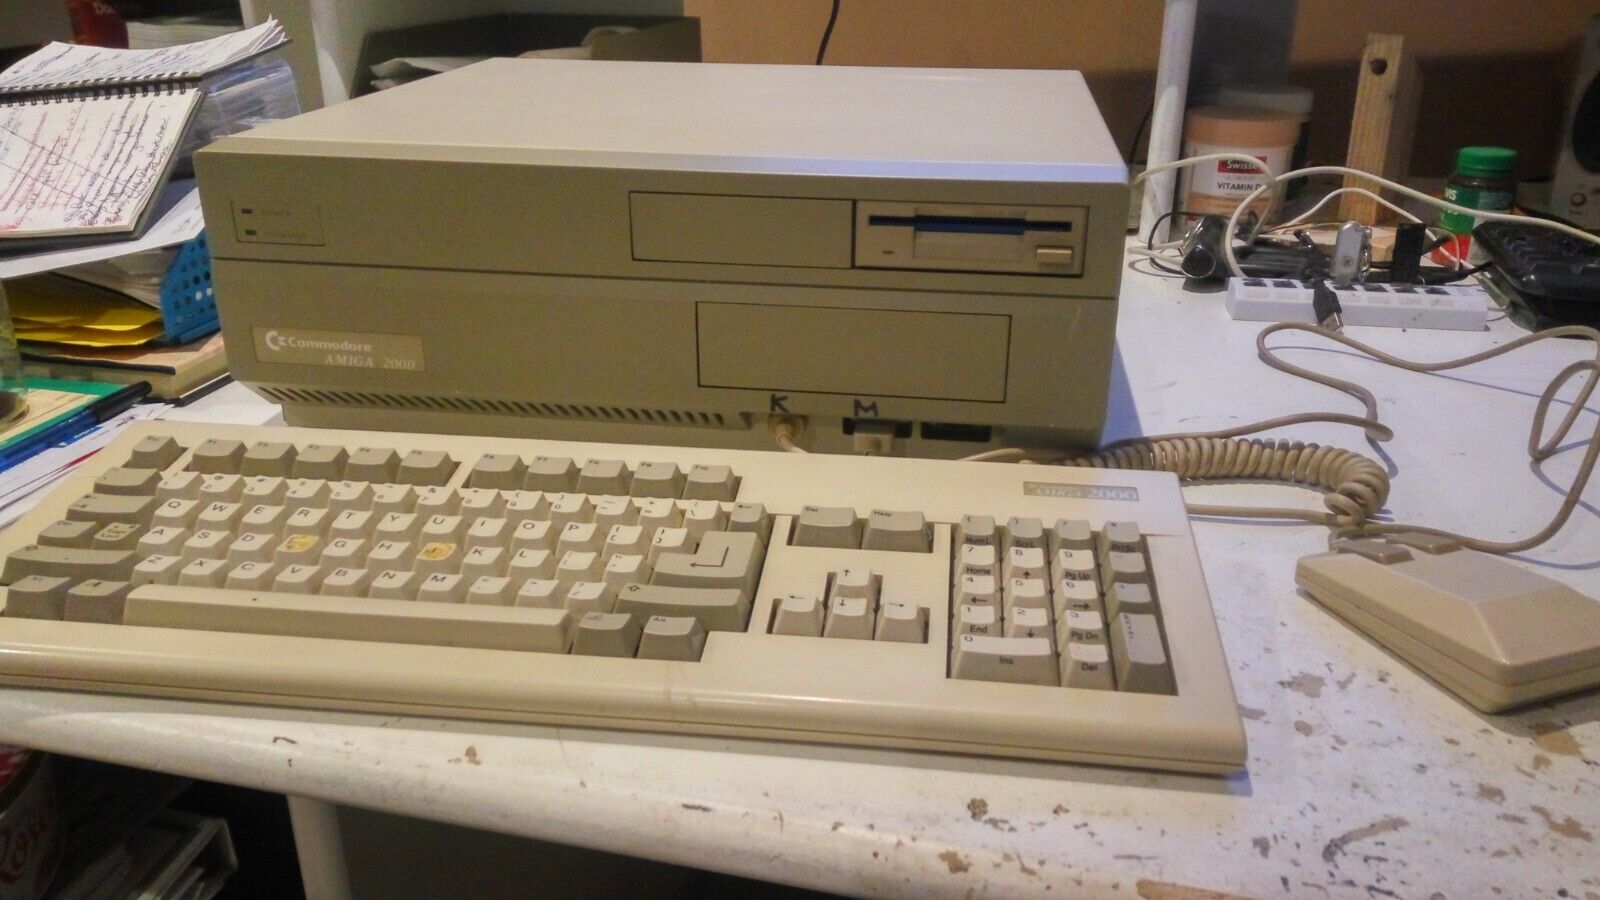 Amiga 2000 fully working  (with non working A2286 as a freebie).